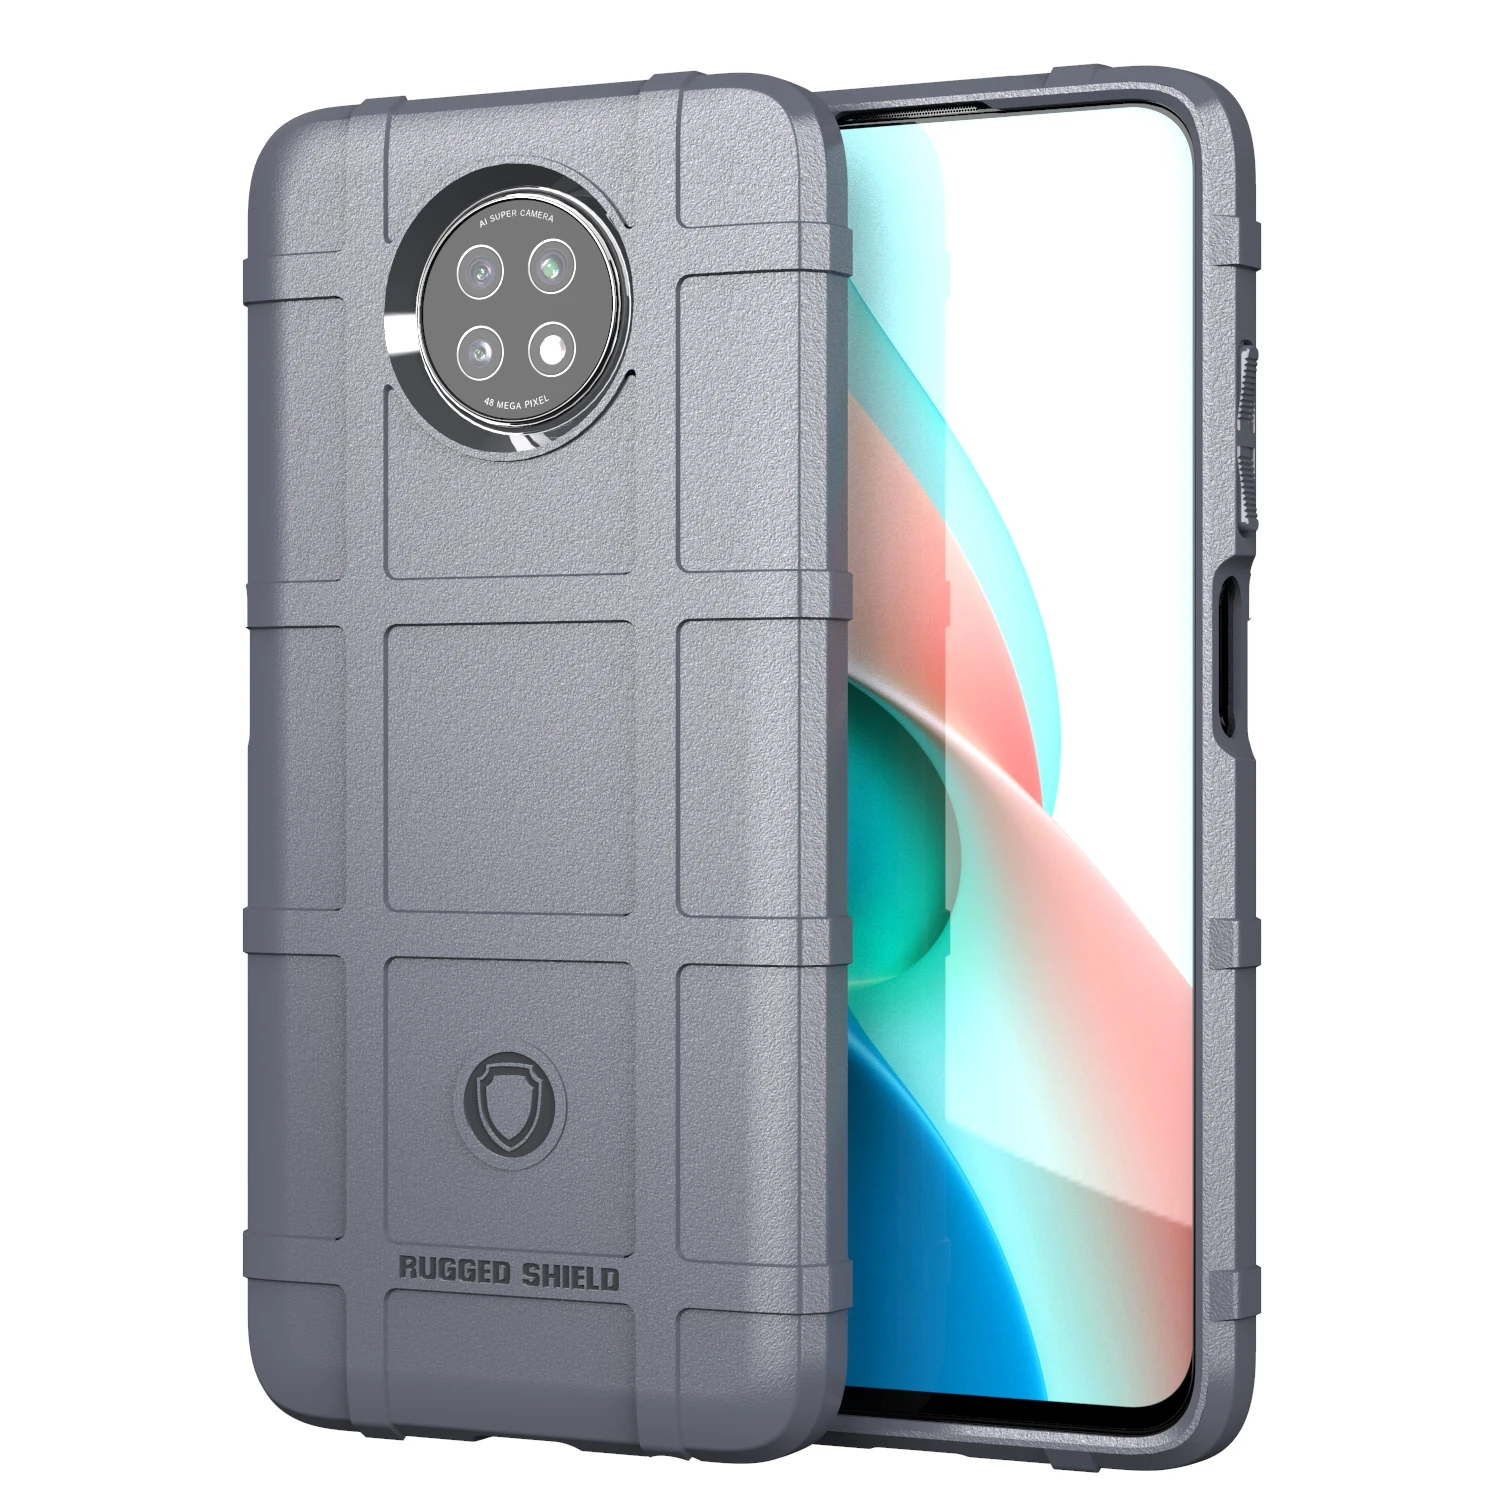 

Rugged Shockproof Shield Soft Rubber Armor Case Cover For XIAOMI RedMi NOTE9 5G, As pictures